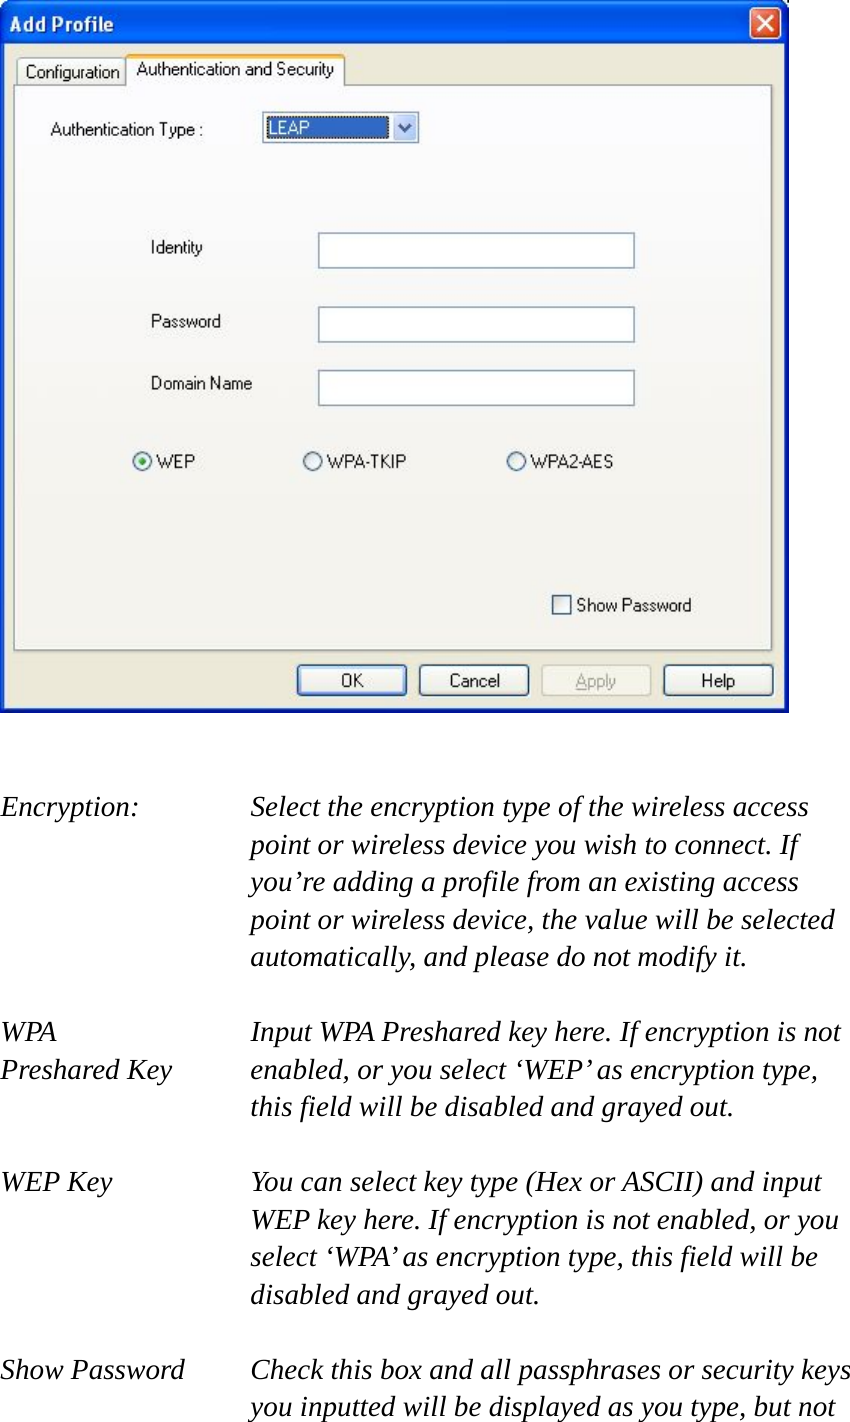    Encryption: Select the encryption type of the wireless access point or wireless device you wish to connect. If you’re adding a profile from an existing access point or wireless device, the value will be selected automatically, and please do not modify it.  WPA    Input WPA Preshared key here. If encryption is not Preshared Key  enabled, or you select ‘WEP’ as encryption type, this field will be disabled and grayed out.  WEP Key  You can select key type (Hex or ASCII) and input WEP key here. If encryption is not enabled, or you select ‘WPA’ as encryption type, this field will be disabled and grayed out.  Show Password  Check this box and all passphrases or security keys you inputted will be displayed as you type, but not 